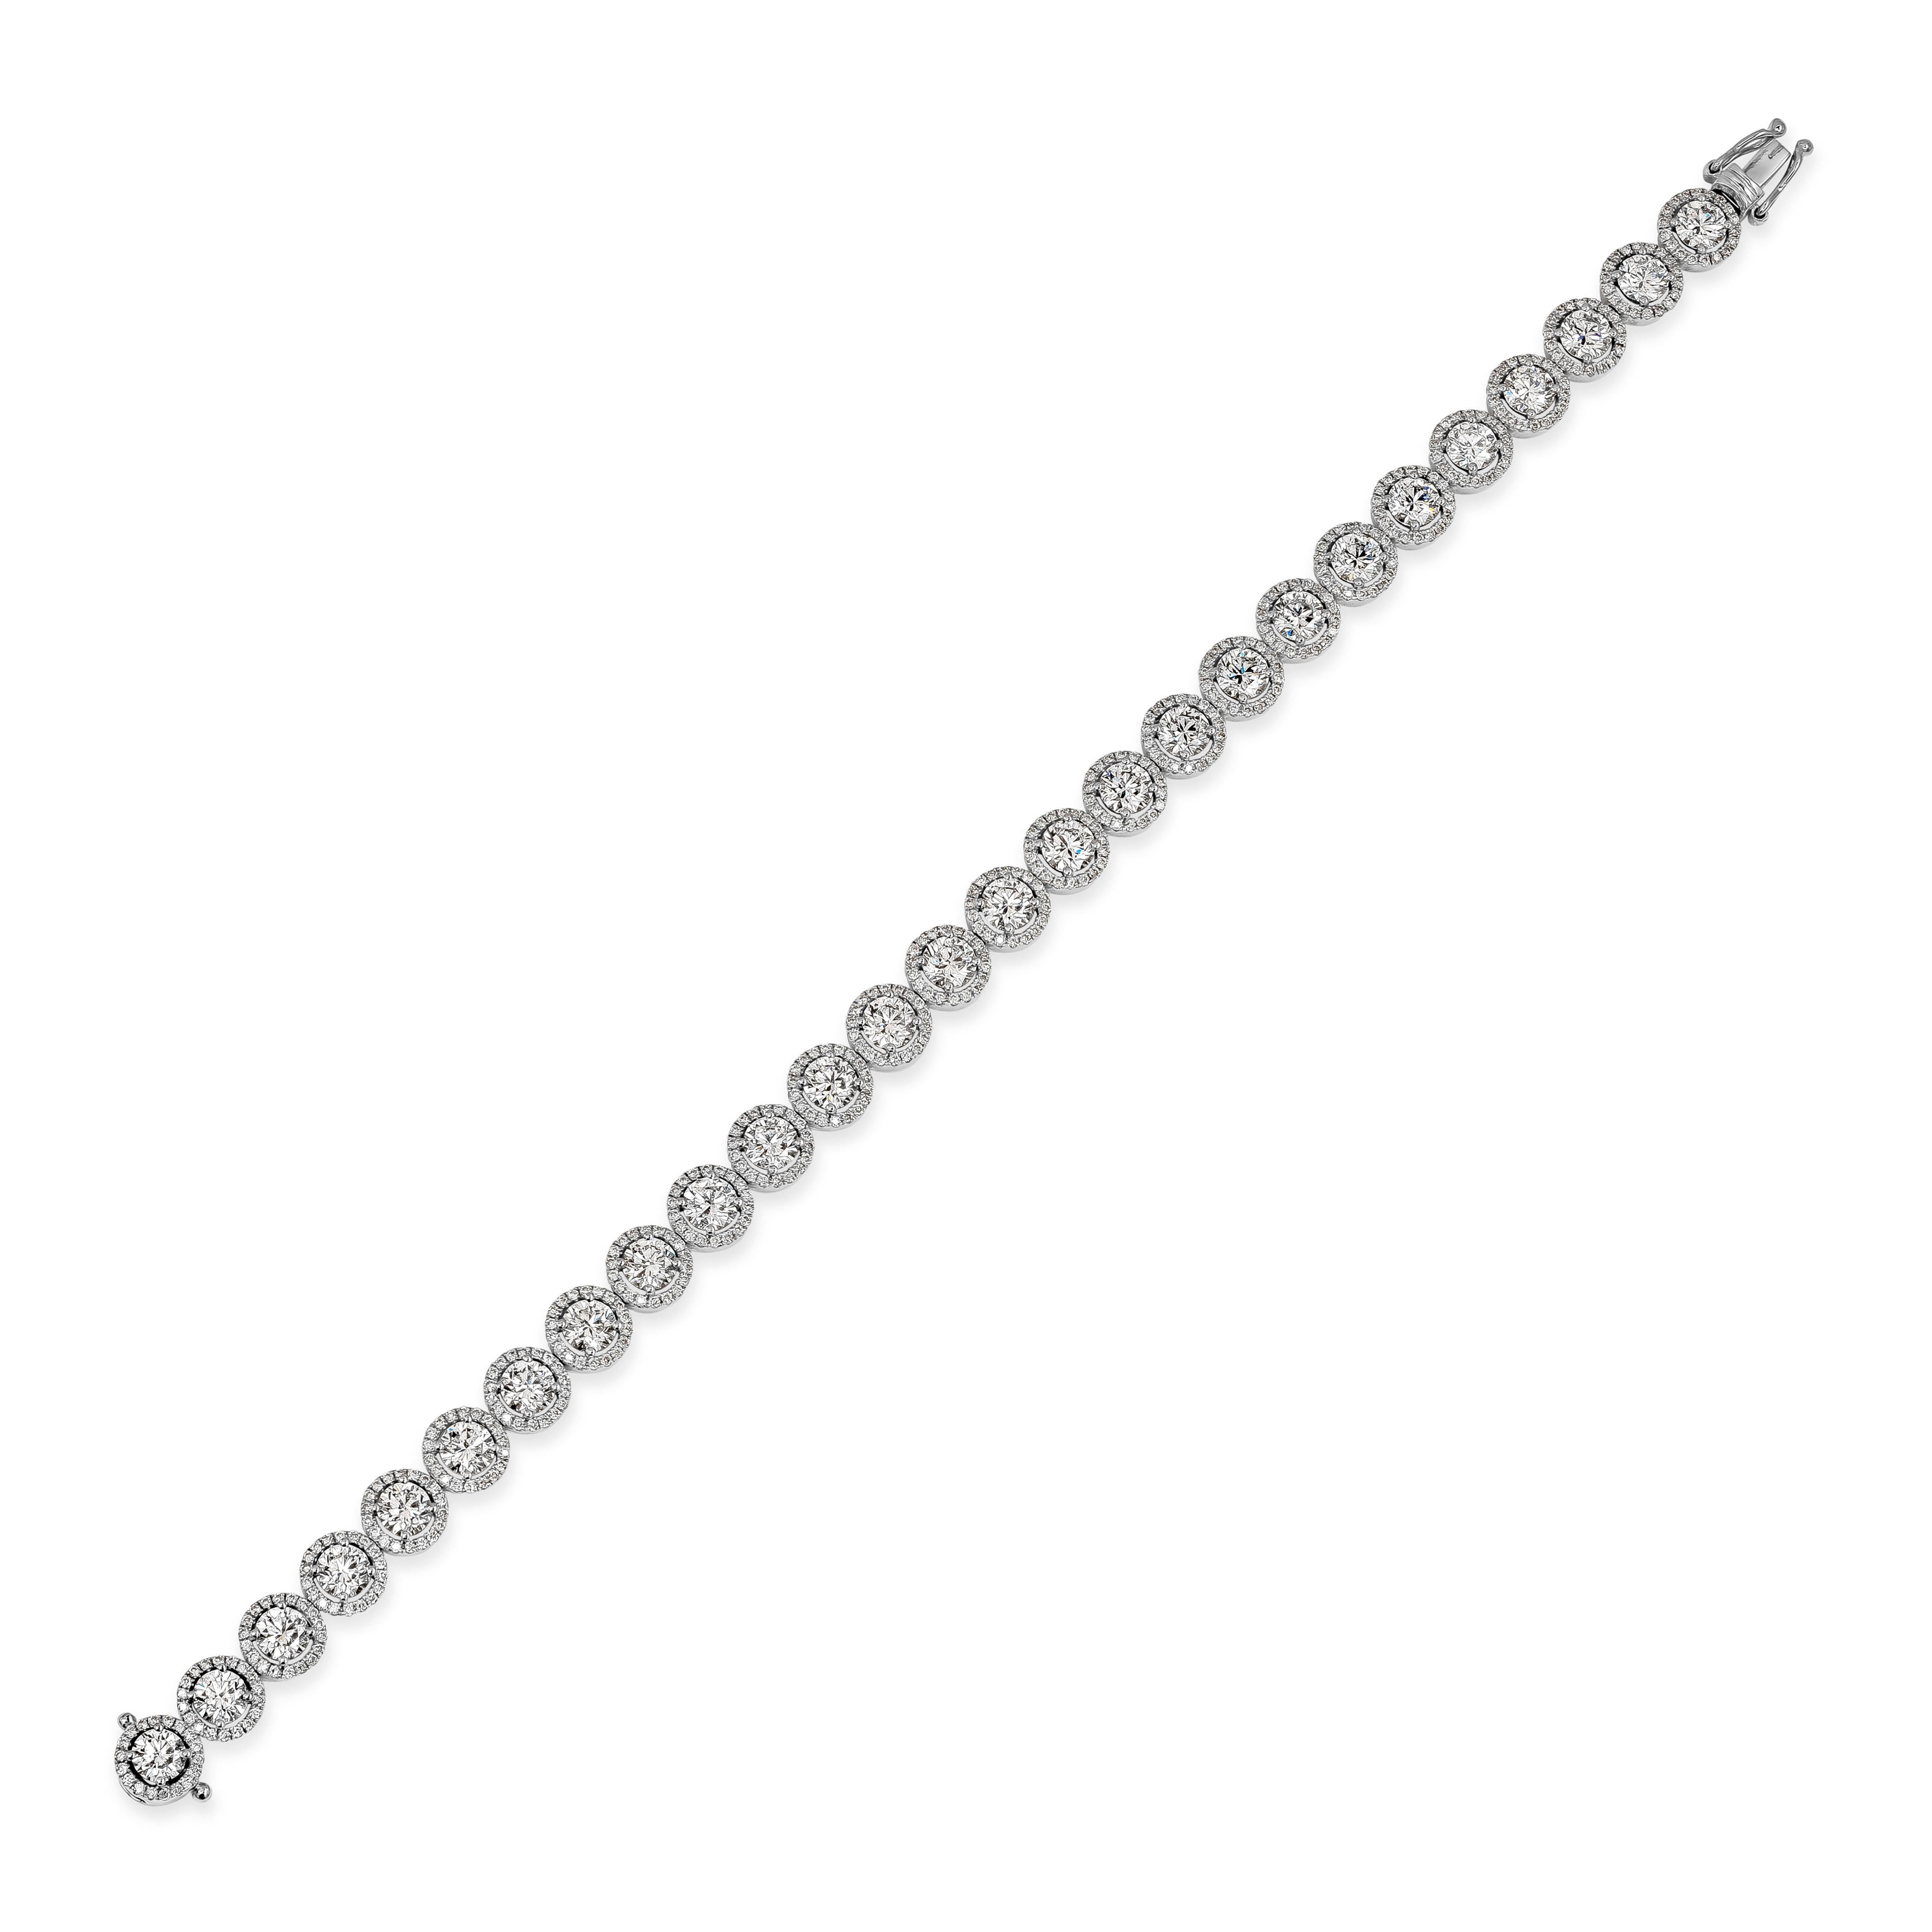 This gorgeous tennis bracelet features 27 round brilliant diamonds weighing 6.47 carats total. Each stone is surrounded by a single row of small round diamonds weighing 1.44 carats total. Made with 18K White Gold. 7.25 inches in Length

Roman